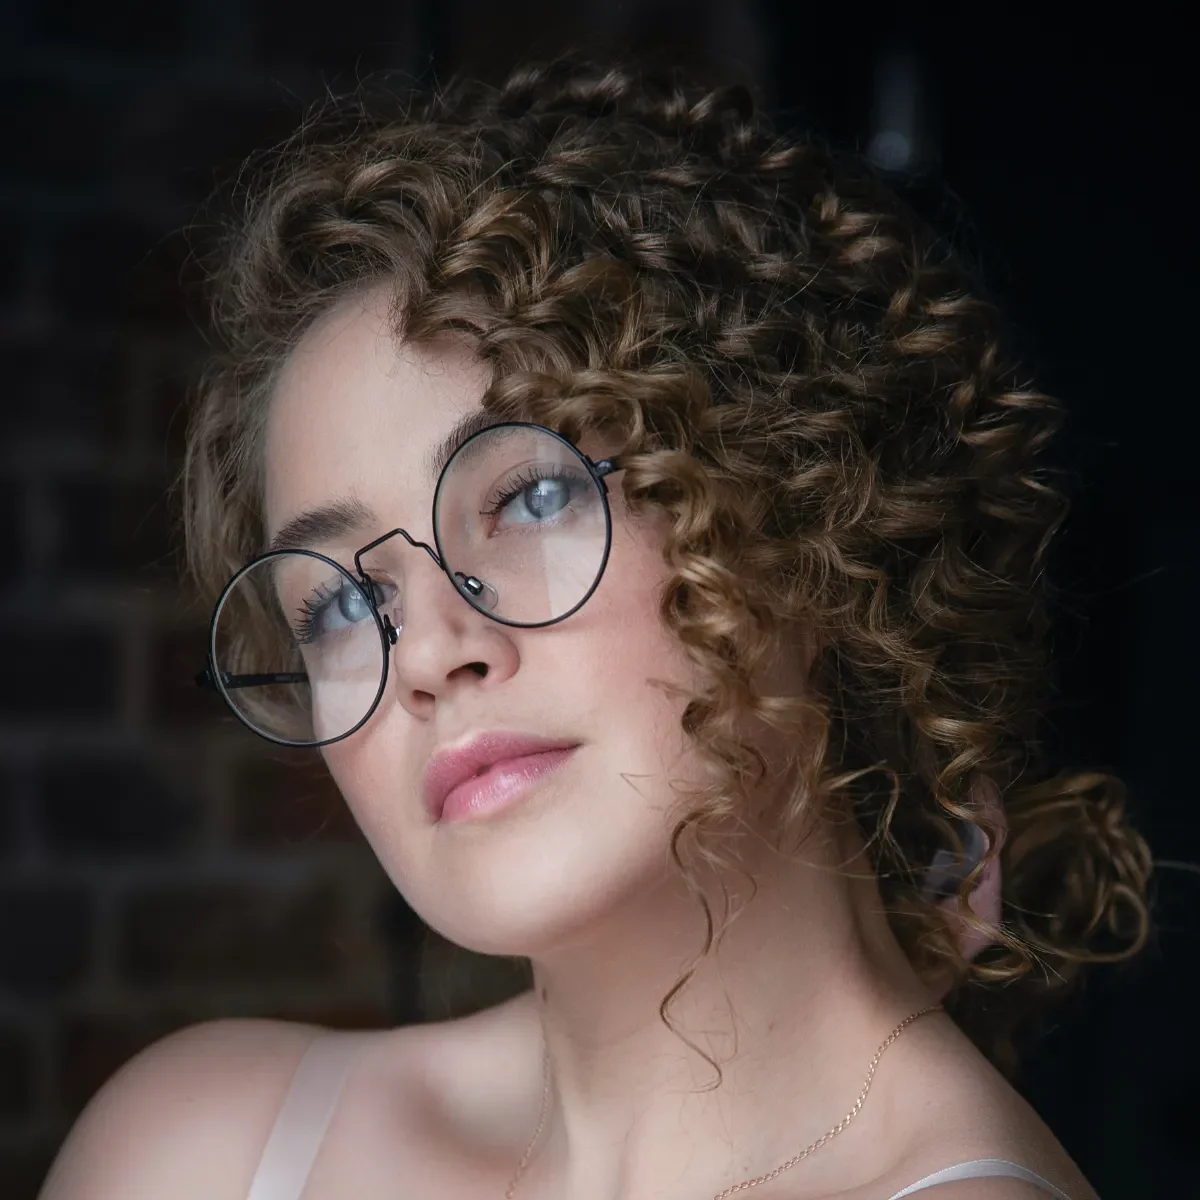 Woman with a nice curly hair